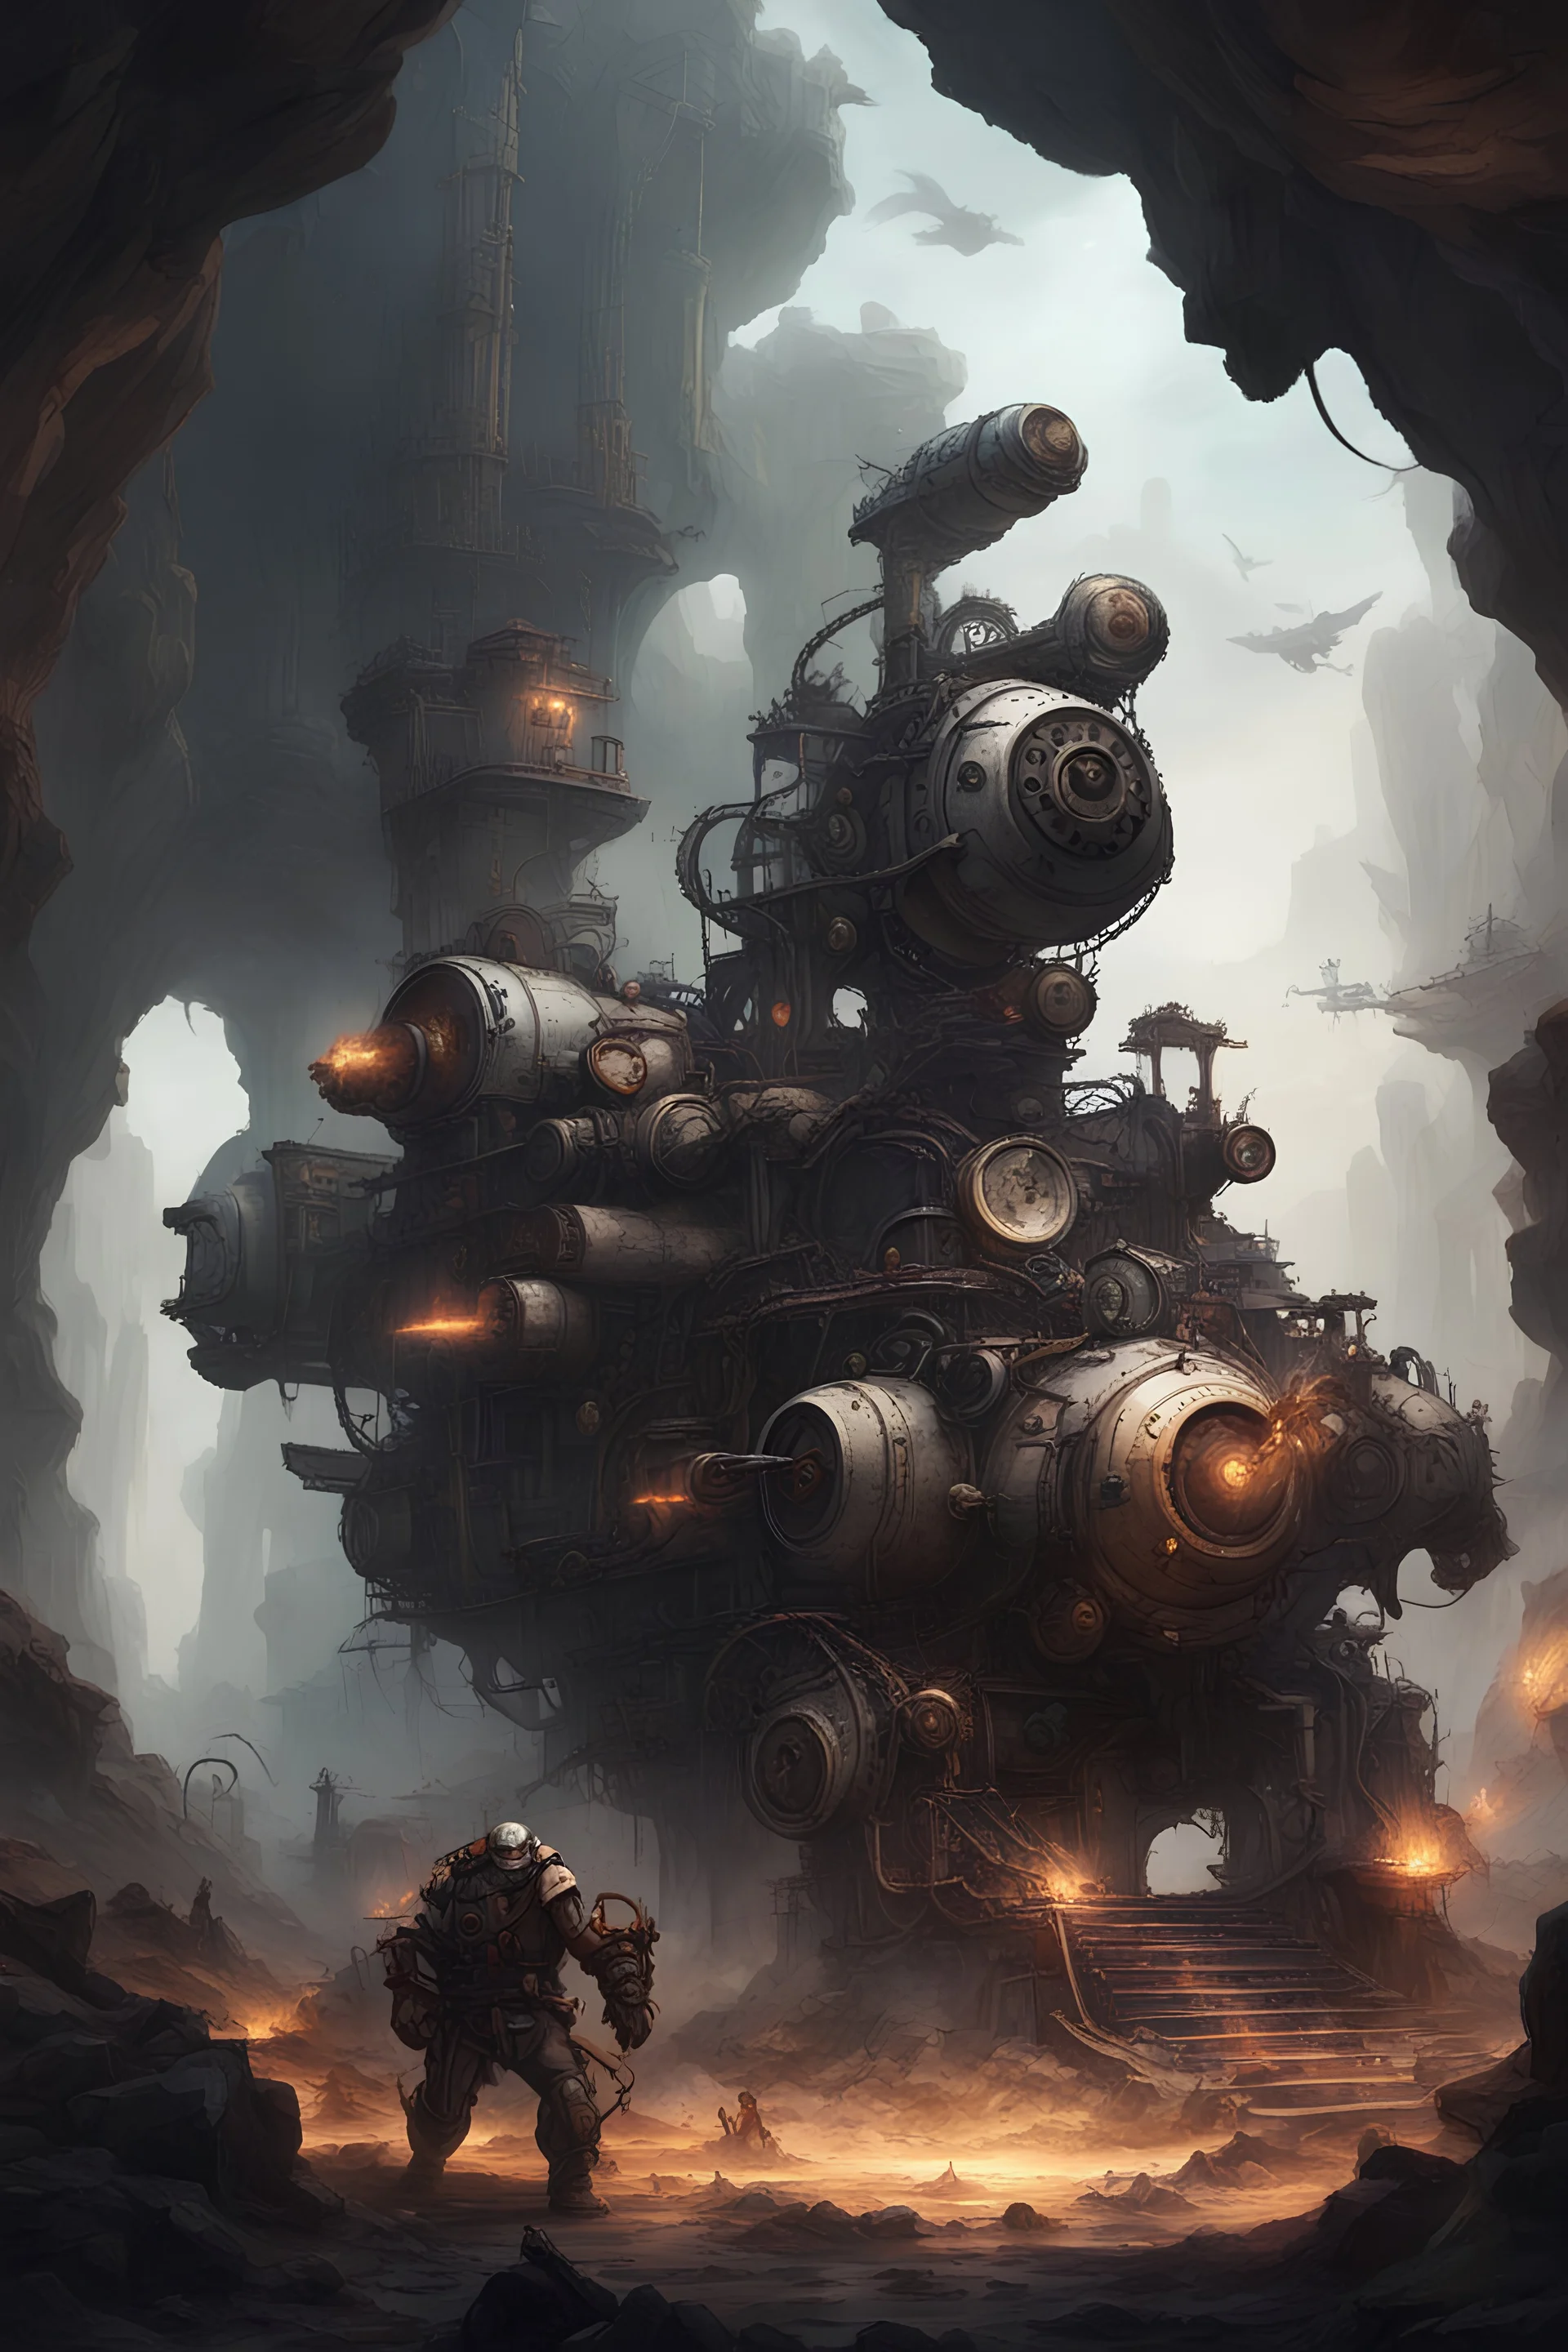 Steam-driven war machines and mechanical constructs reshape the landscape, but the delicate balance between nature and machine begins to unravel, causing unforeseen consequences that threaten to engulf the Shadowed Caverns in chaos.